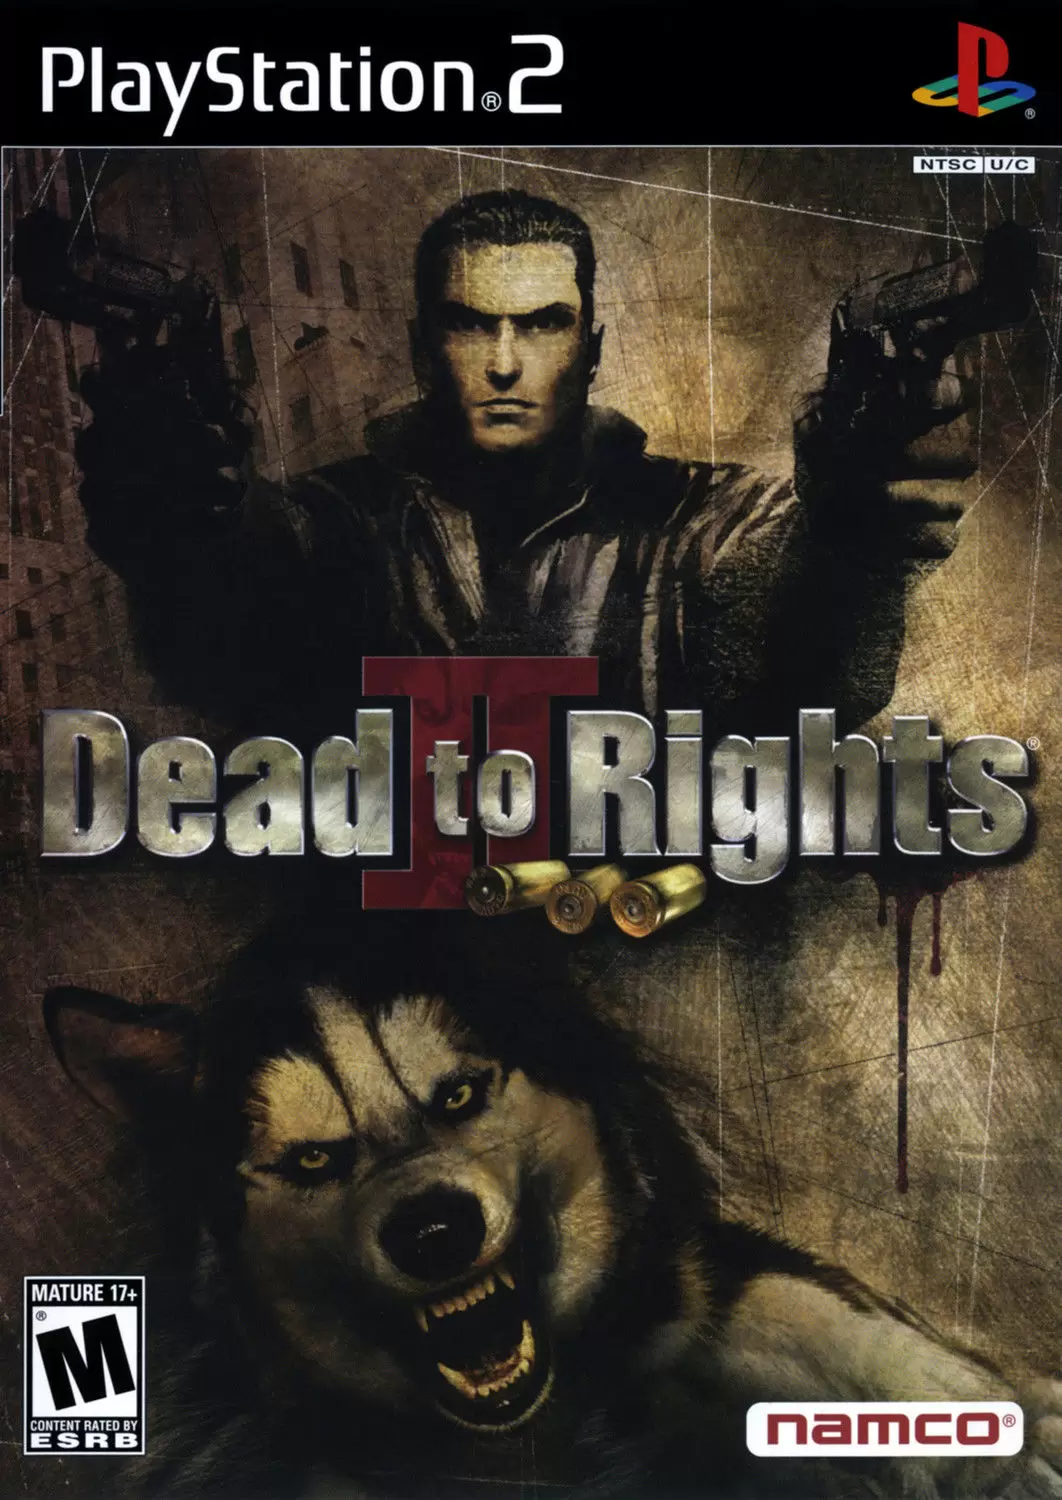 PS2 Games - Dead to Rights II